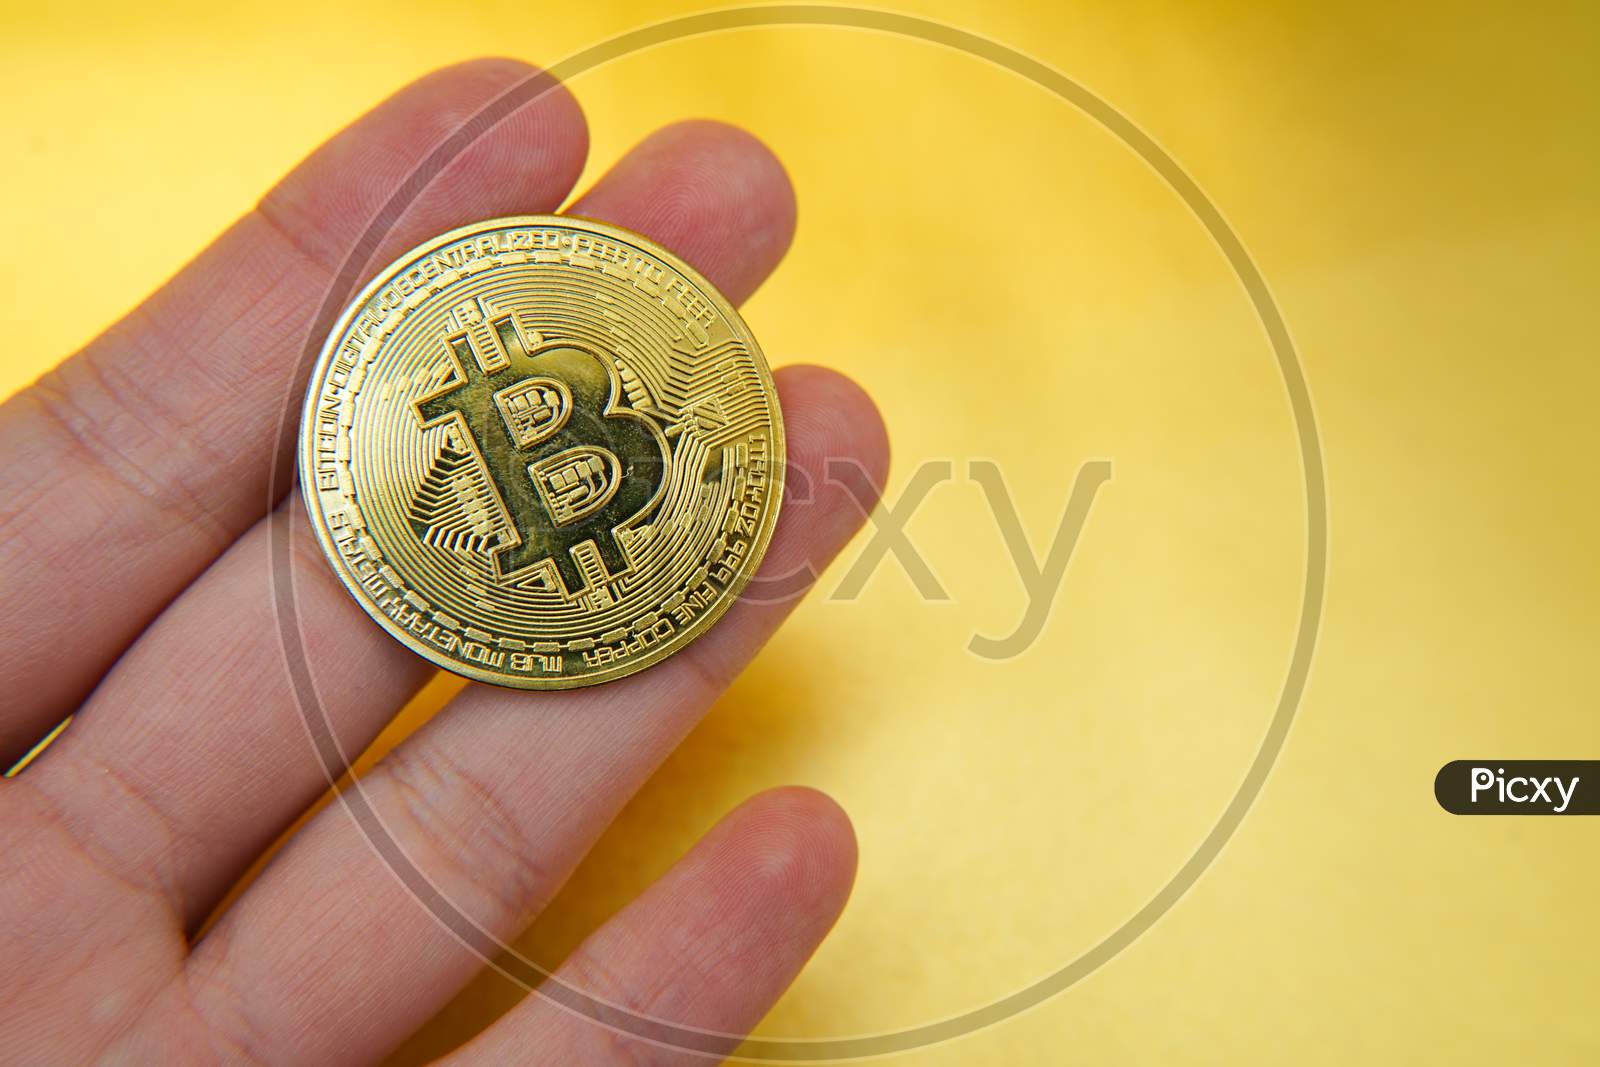 Image Of Bit Coin (Virtual Currency)